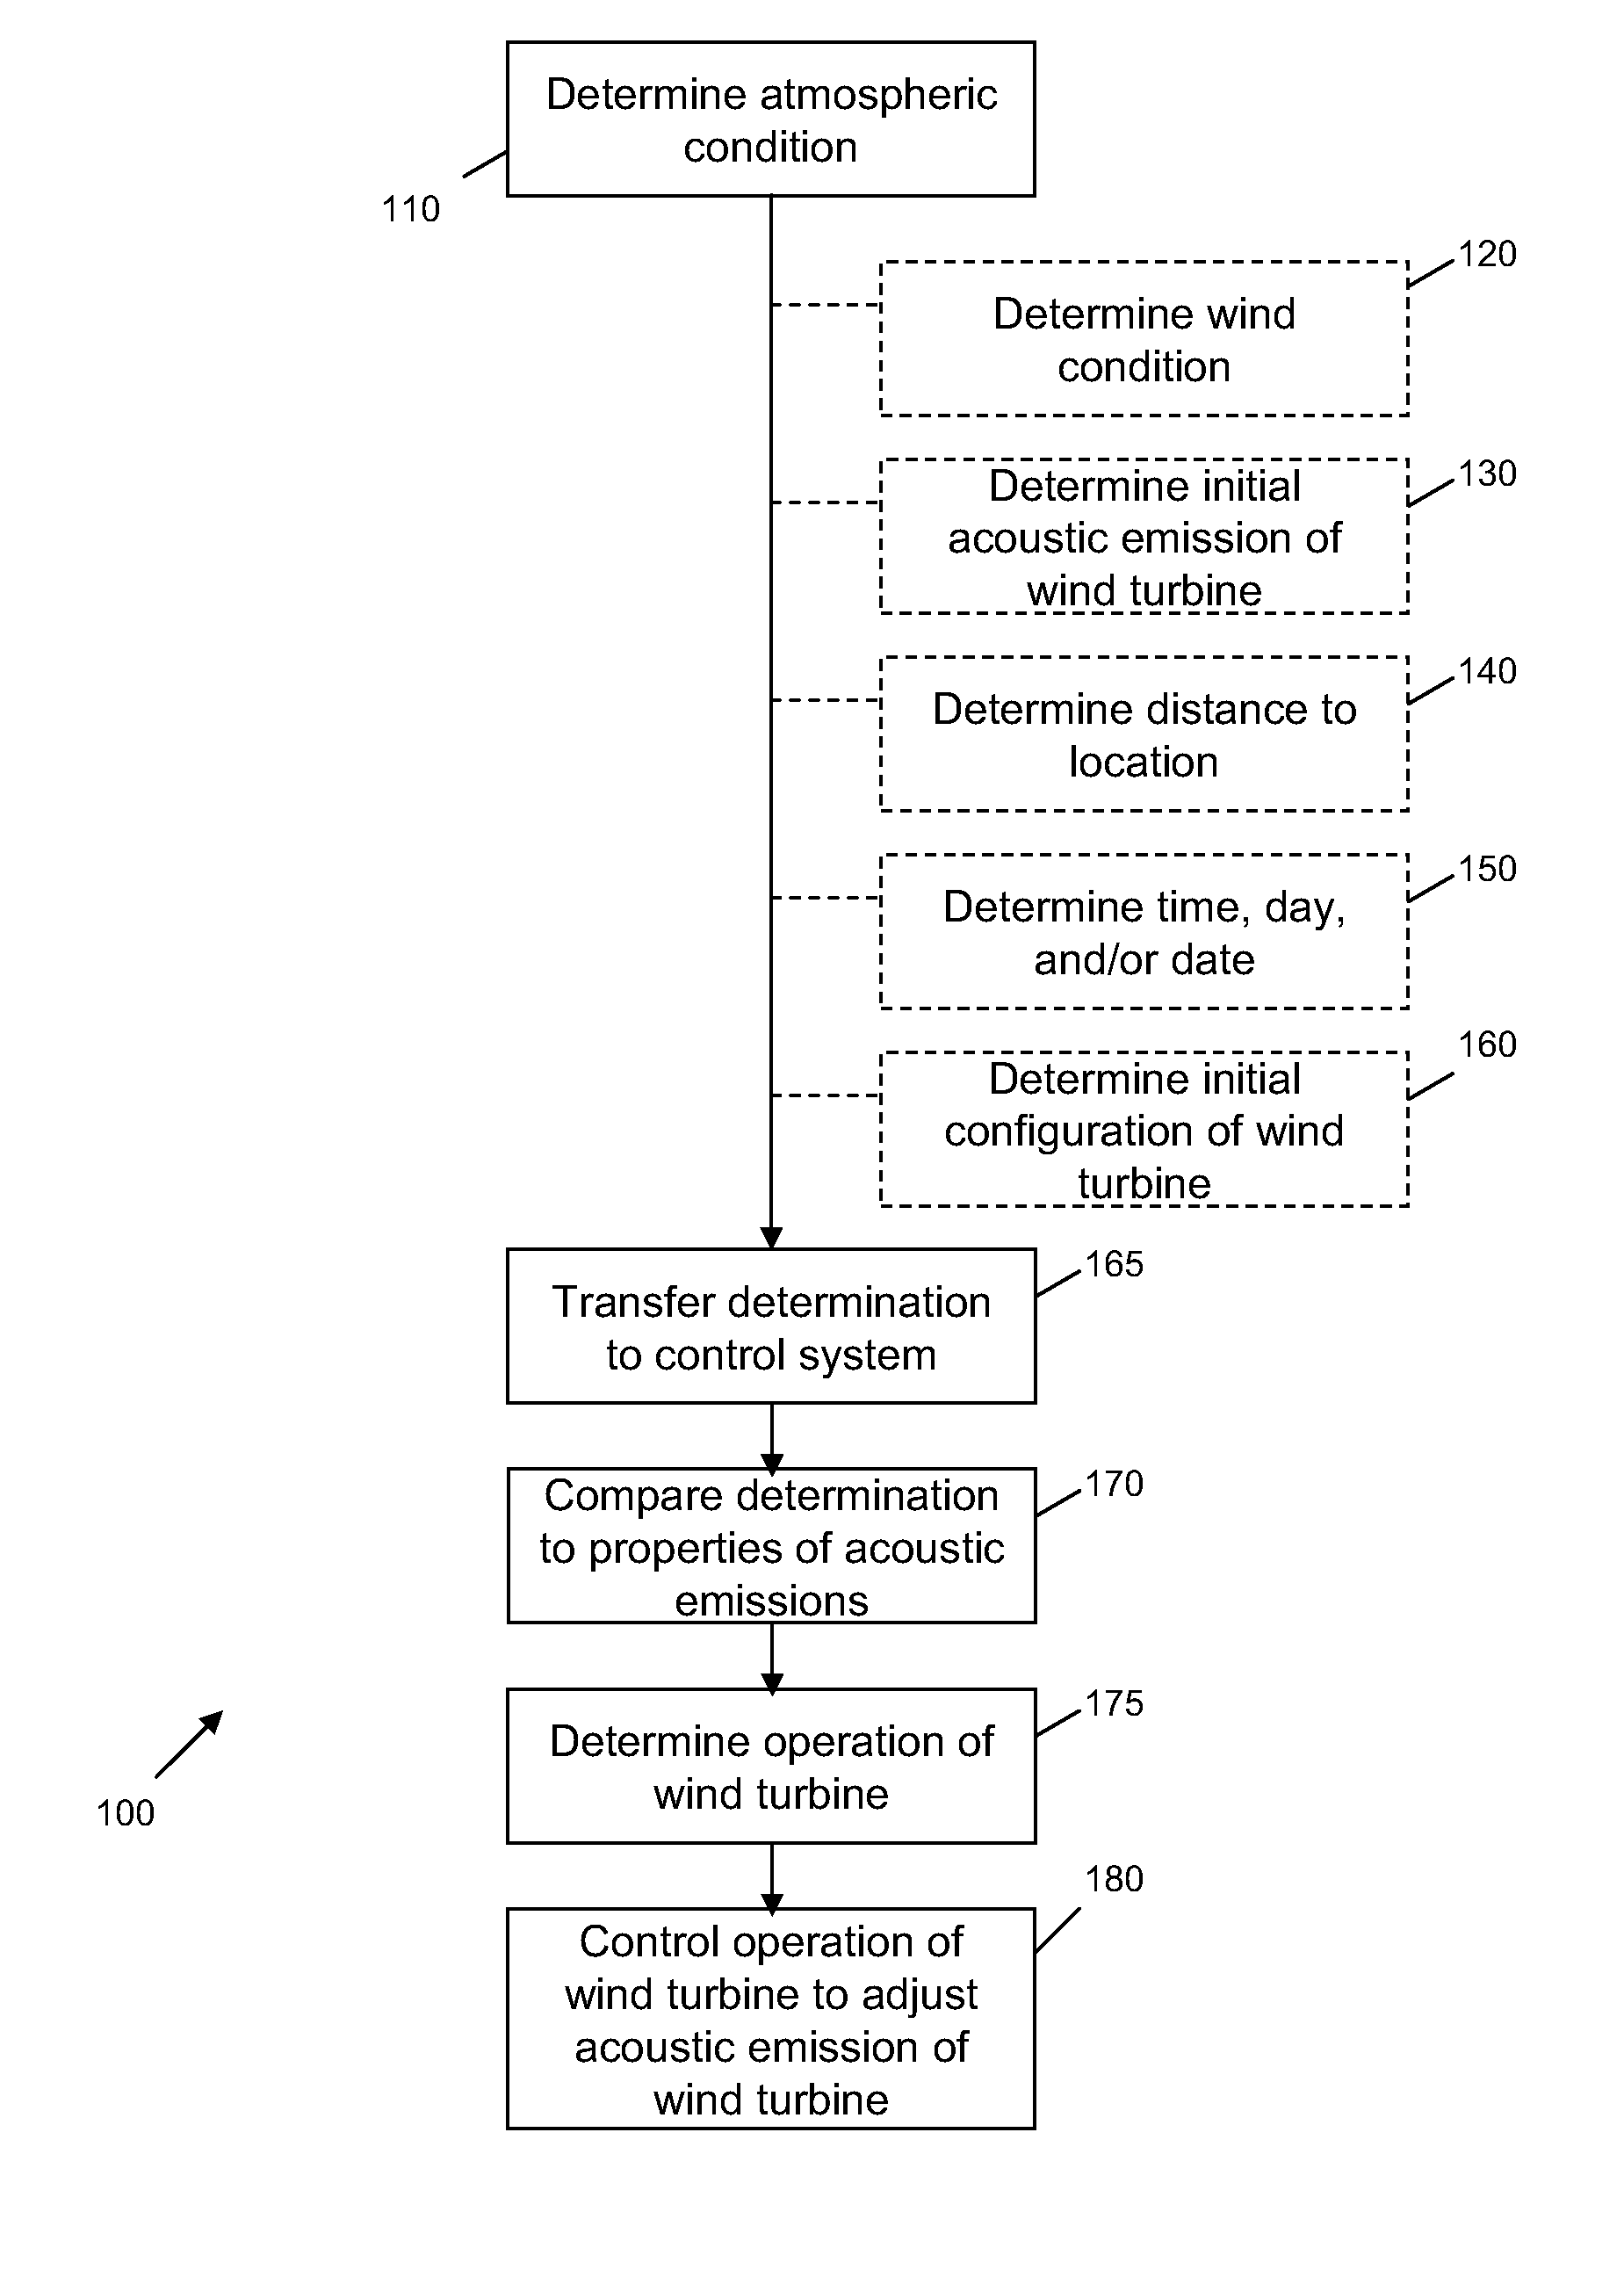 Method and apparatus for controlling acoustic emissions of a wind turbine